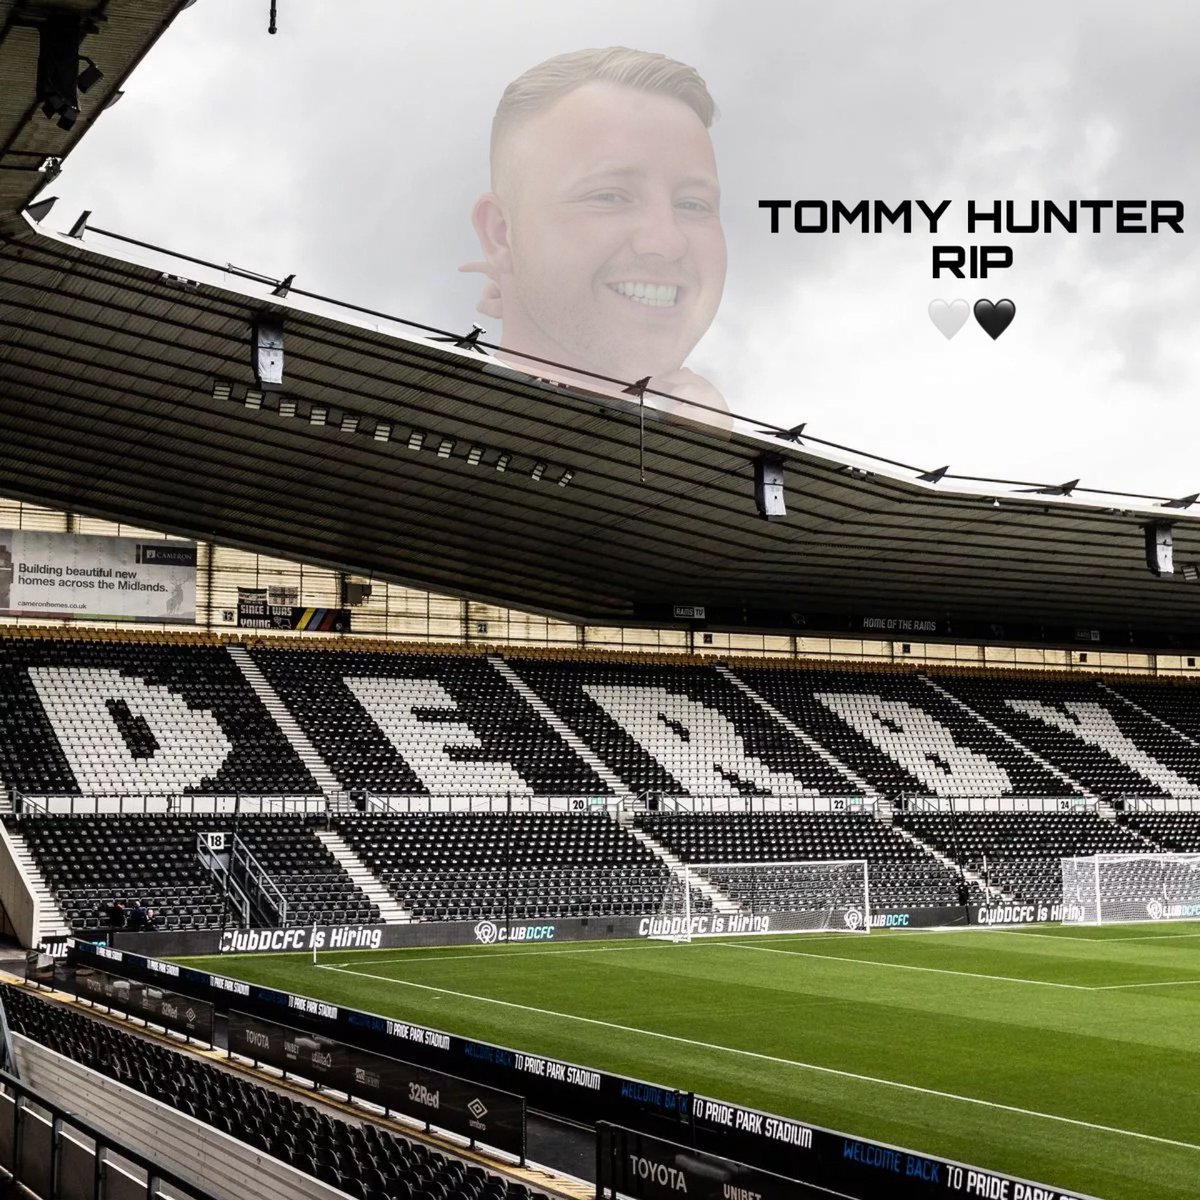 Please keep sharing. Let’s have a minutes applause on the 27th minute of tomorrow’s game for #DCFC fan Tommy Hunter, the victim of a hit-and-run last week aged 27. He was one of our own.